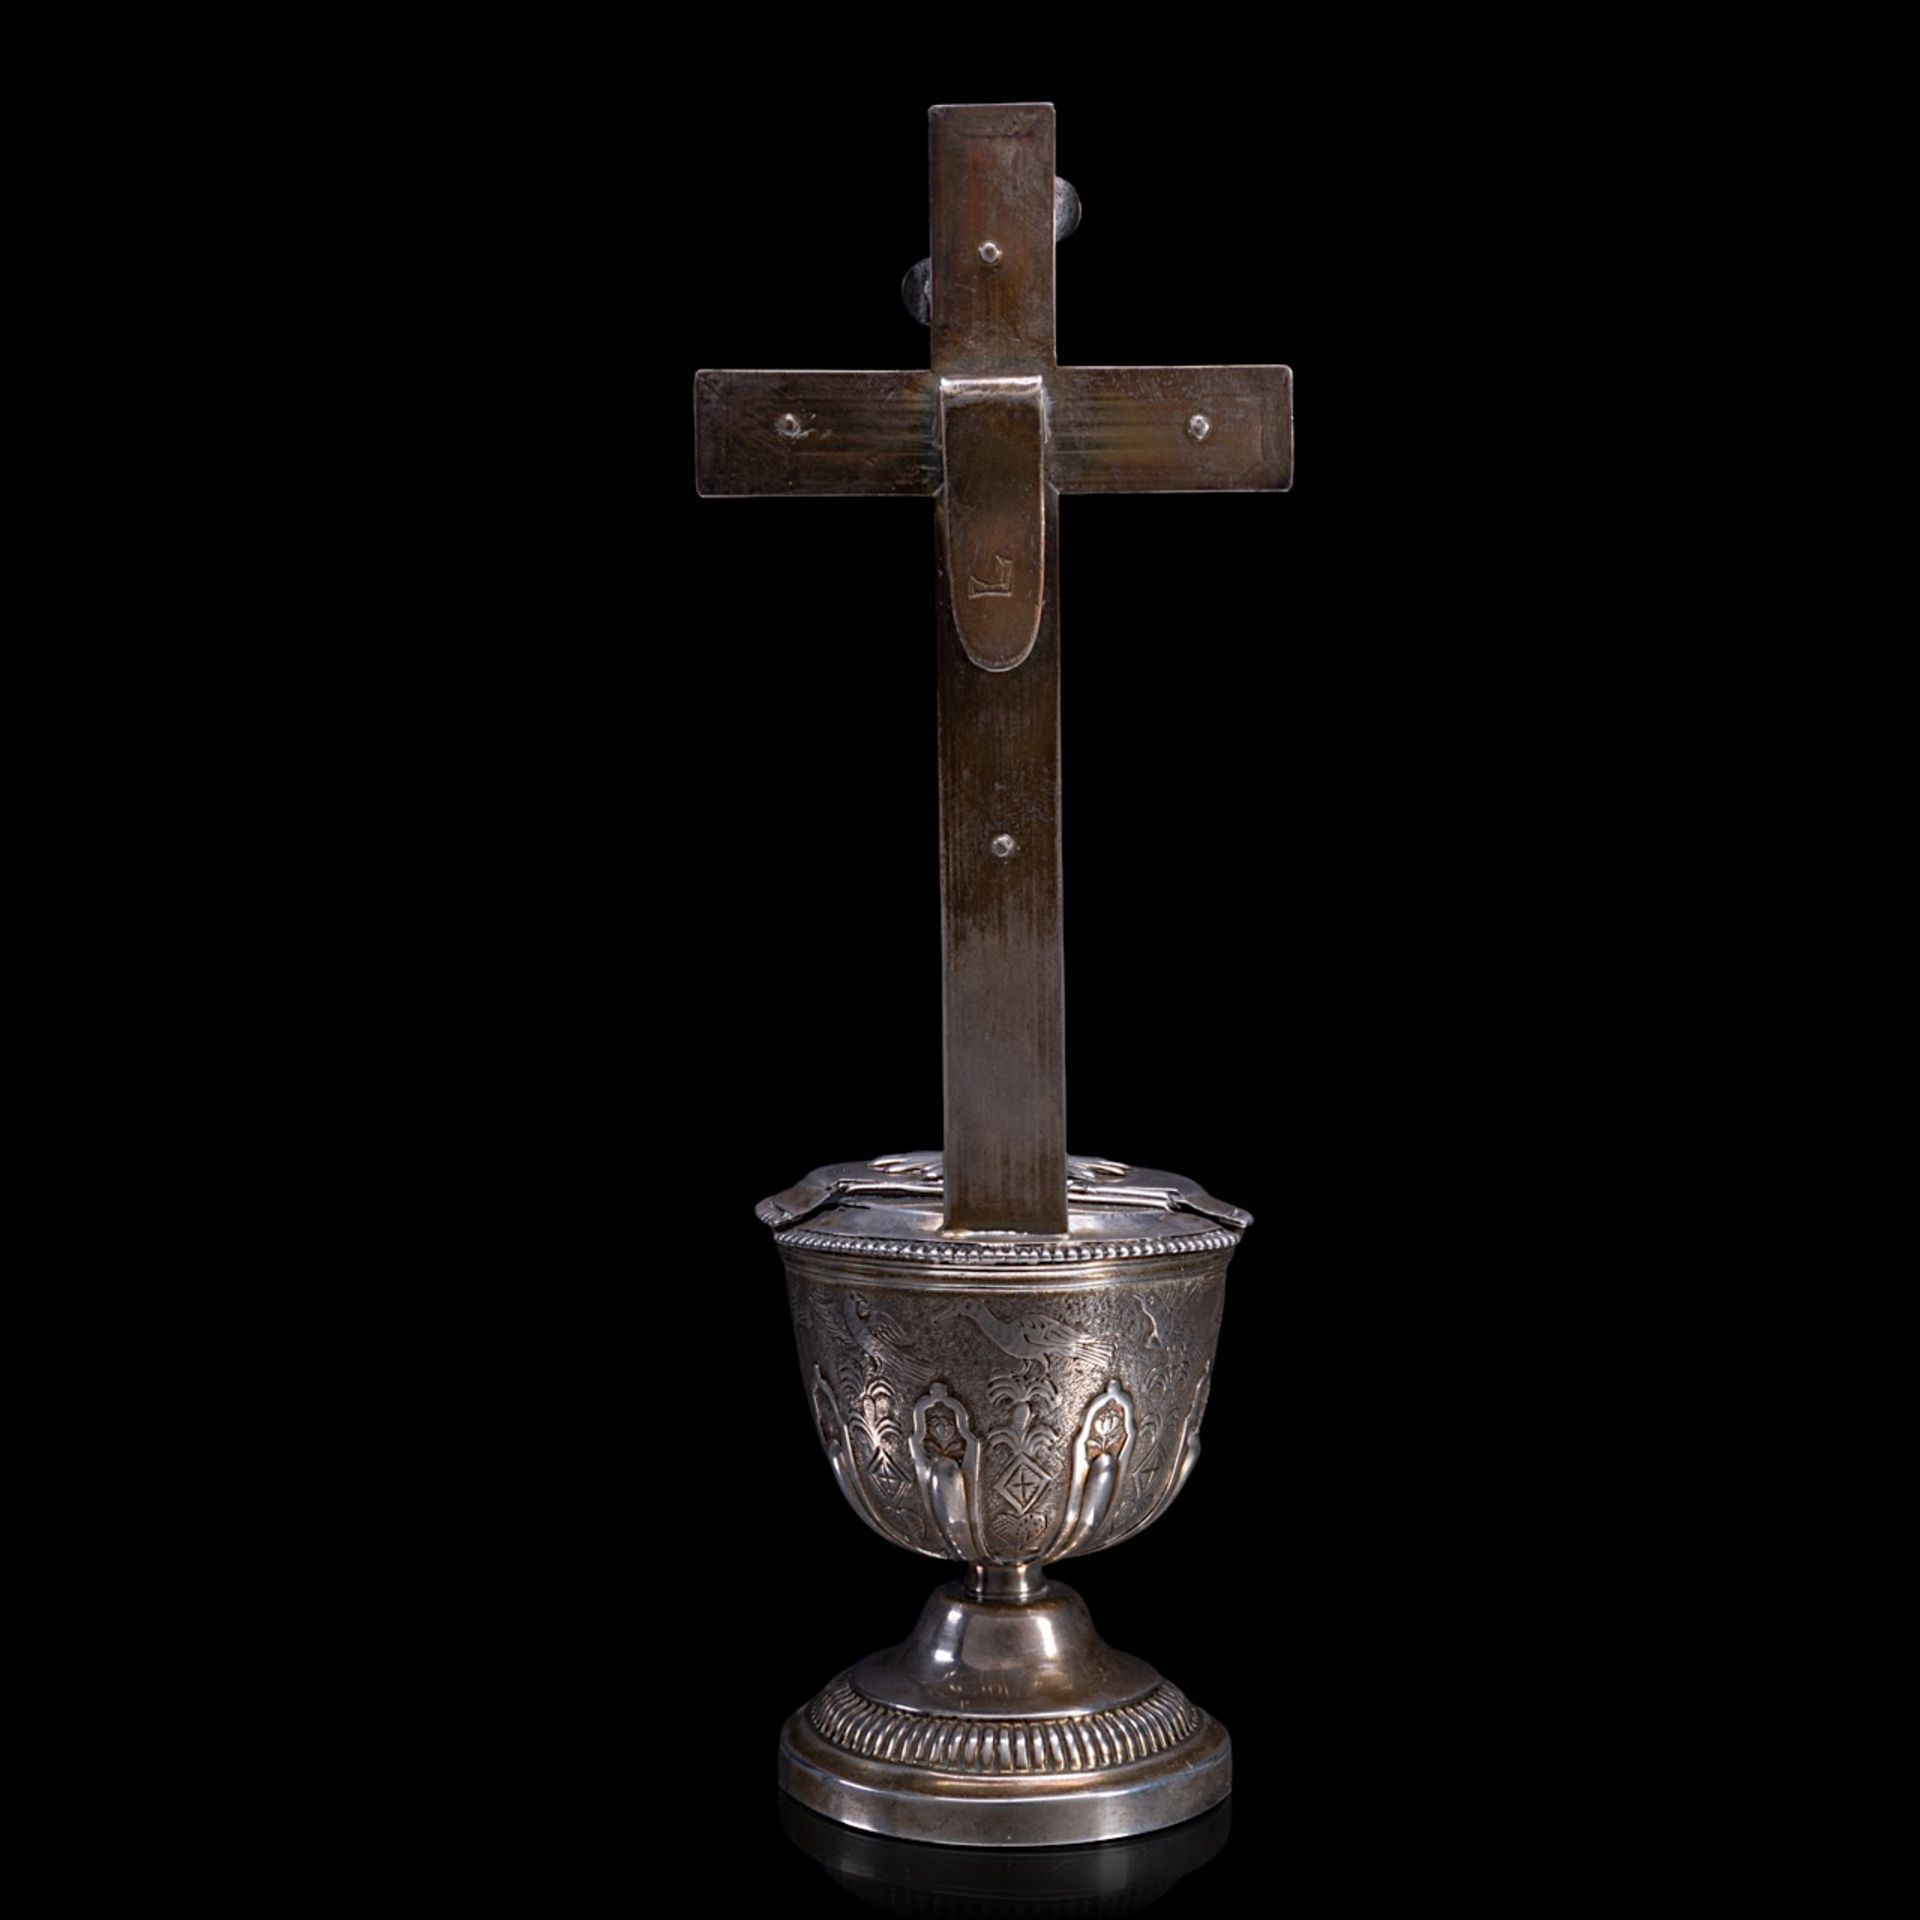 An 18thC Regence silver holy water font, probably Tournai, date letter F, weight 244 g - H 24,1 cm - Image 4 of 8